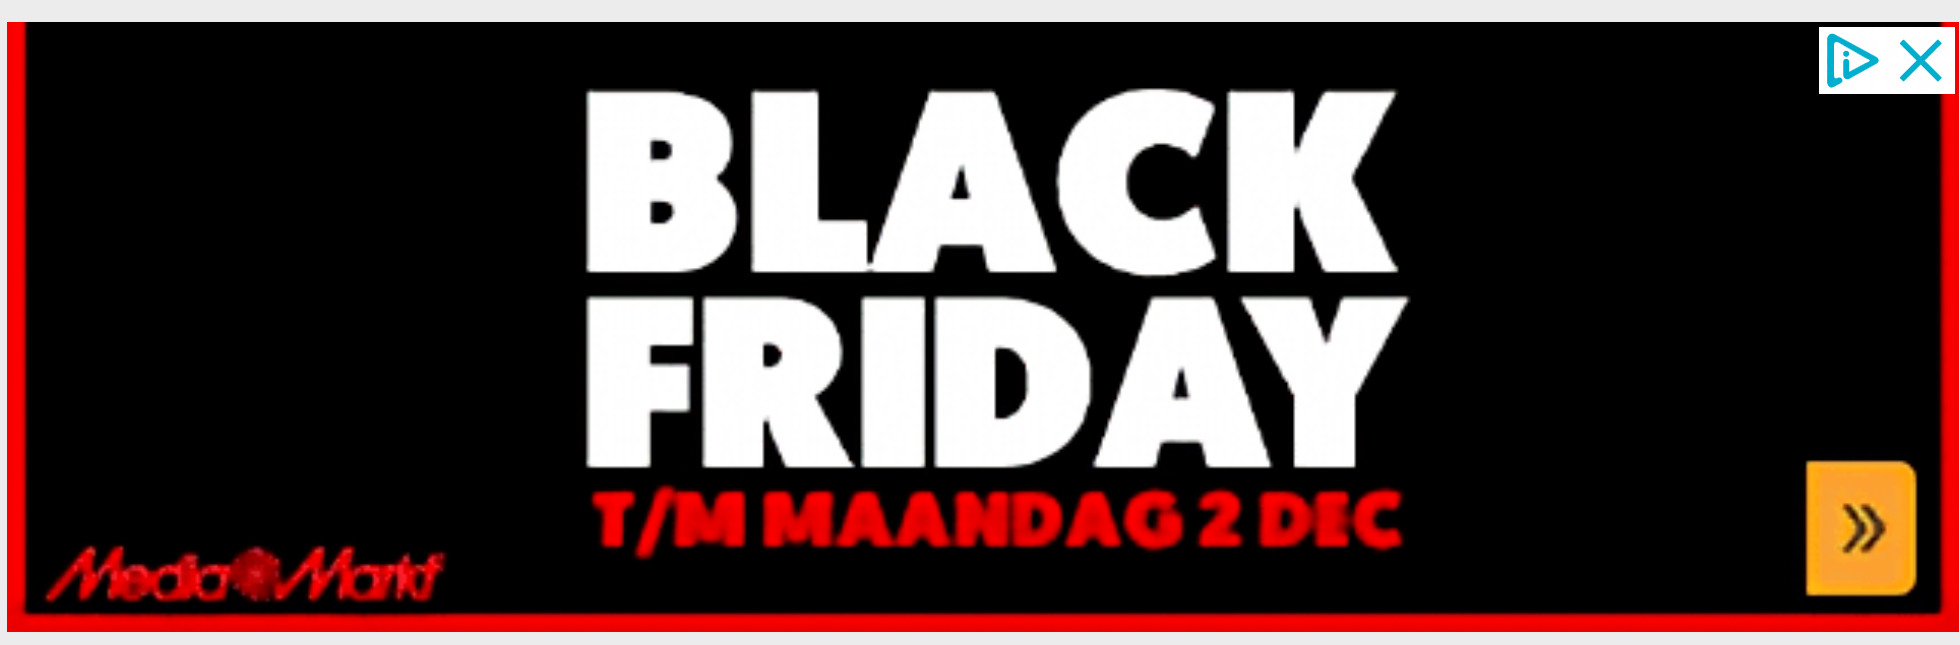 File:Media Markt Friday banner advertisement Ads) 2019.png - Wikimedia Commons